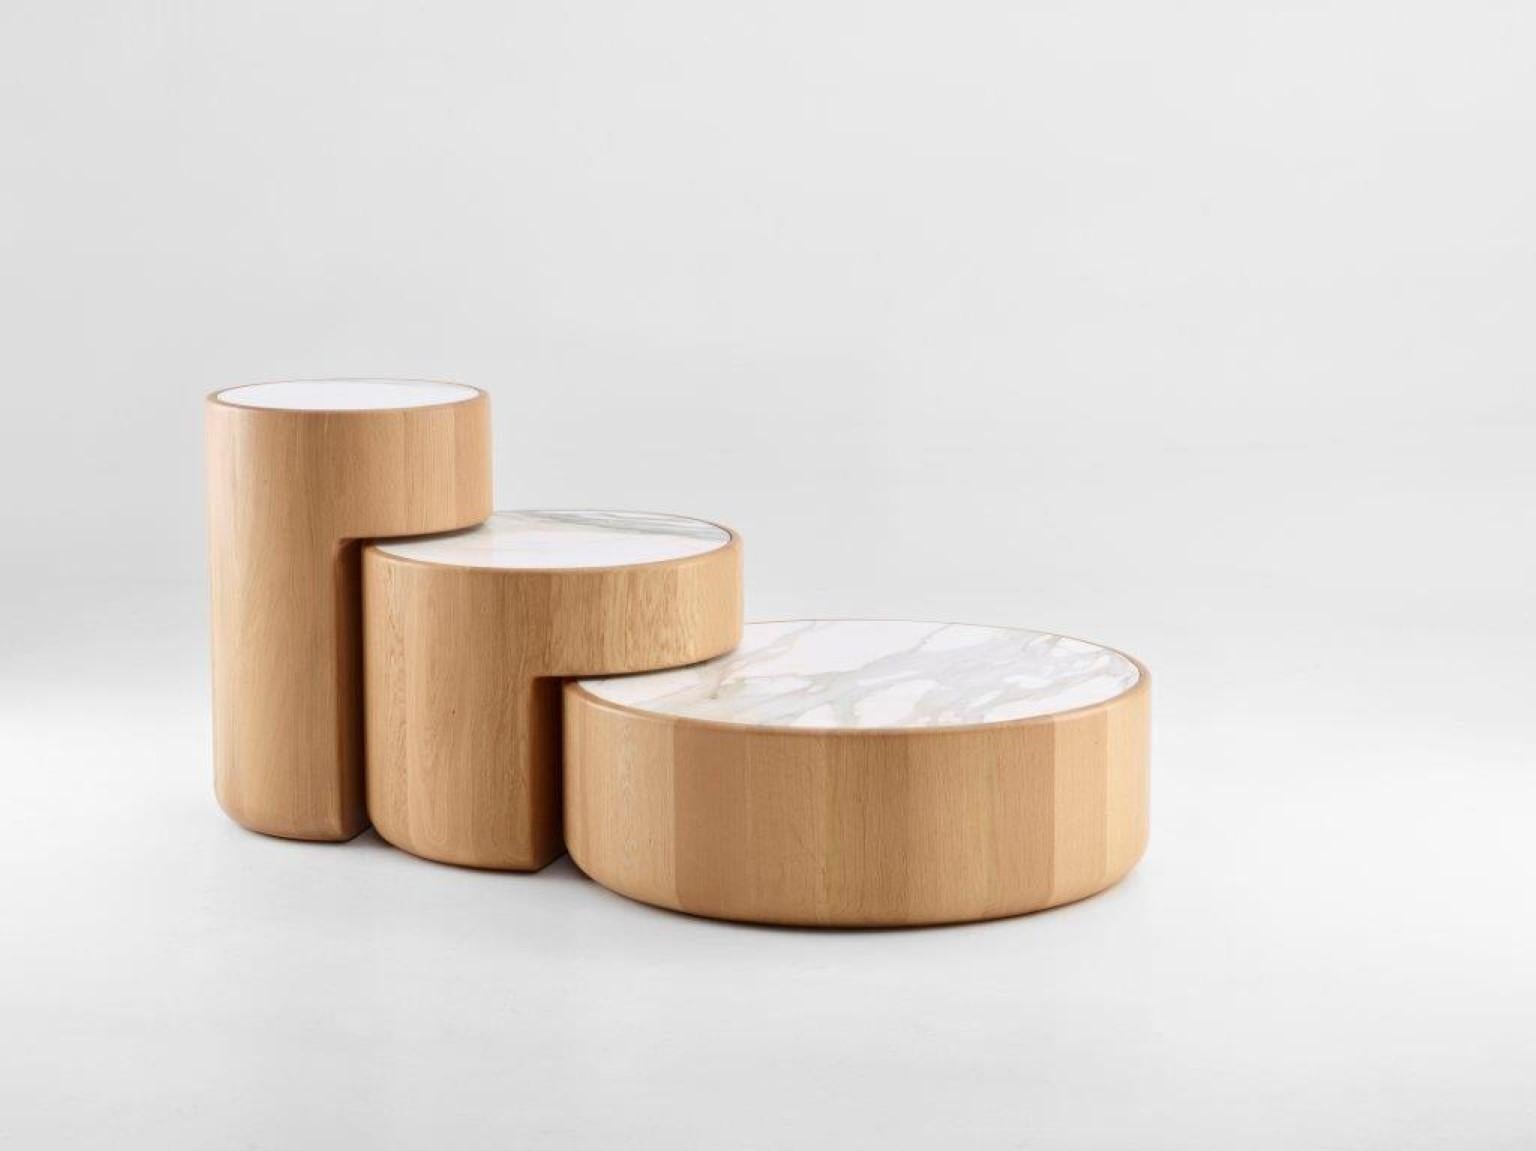 Contemporary Levels Set of 3 Nesting Tables by Dan Yeffet & Lucie Koldova For Sale